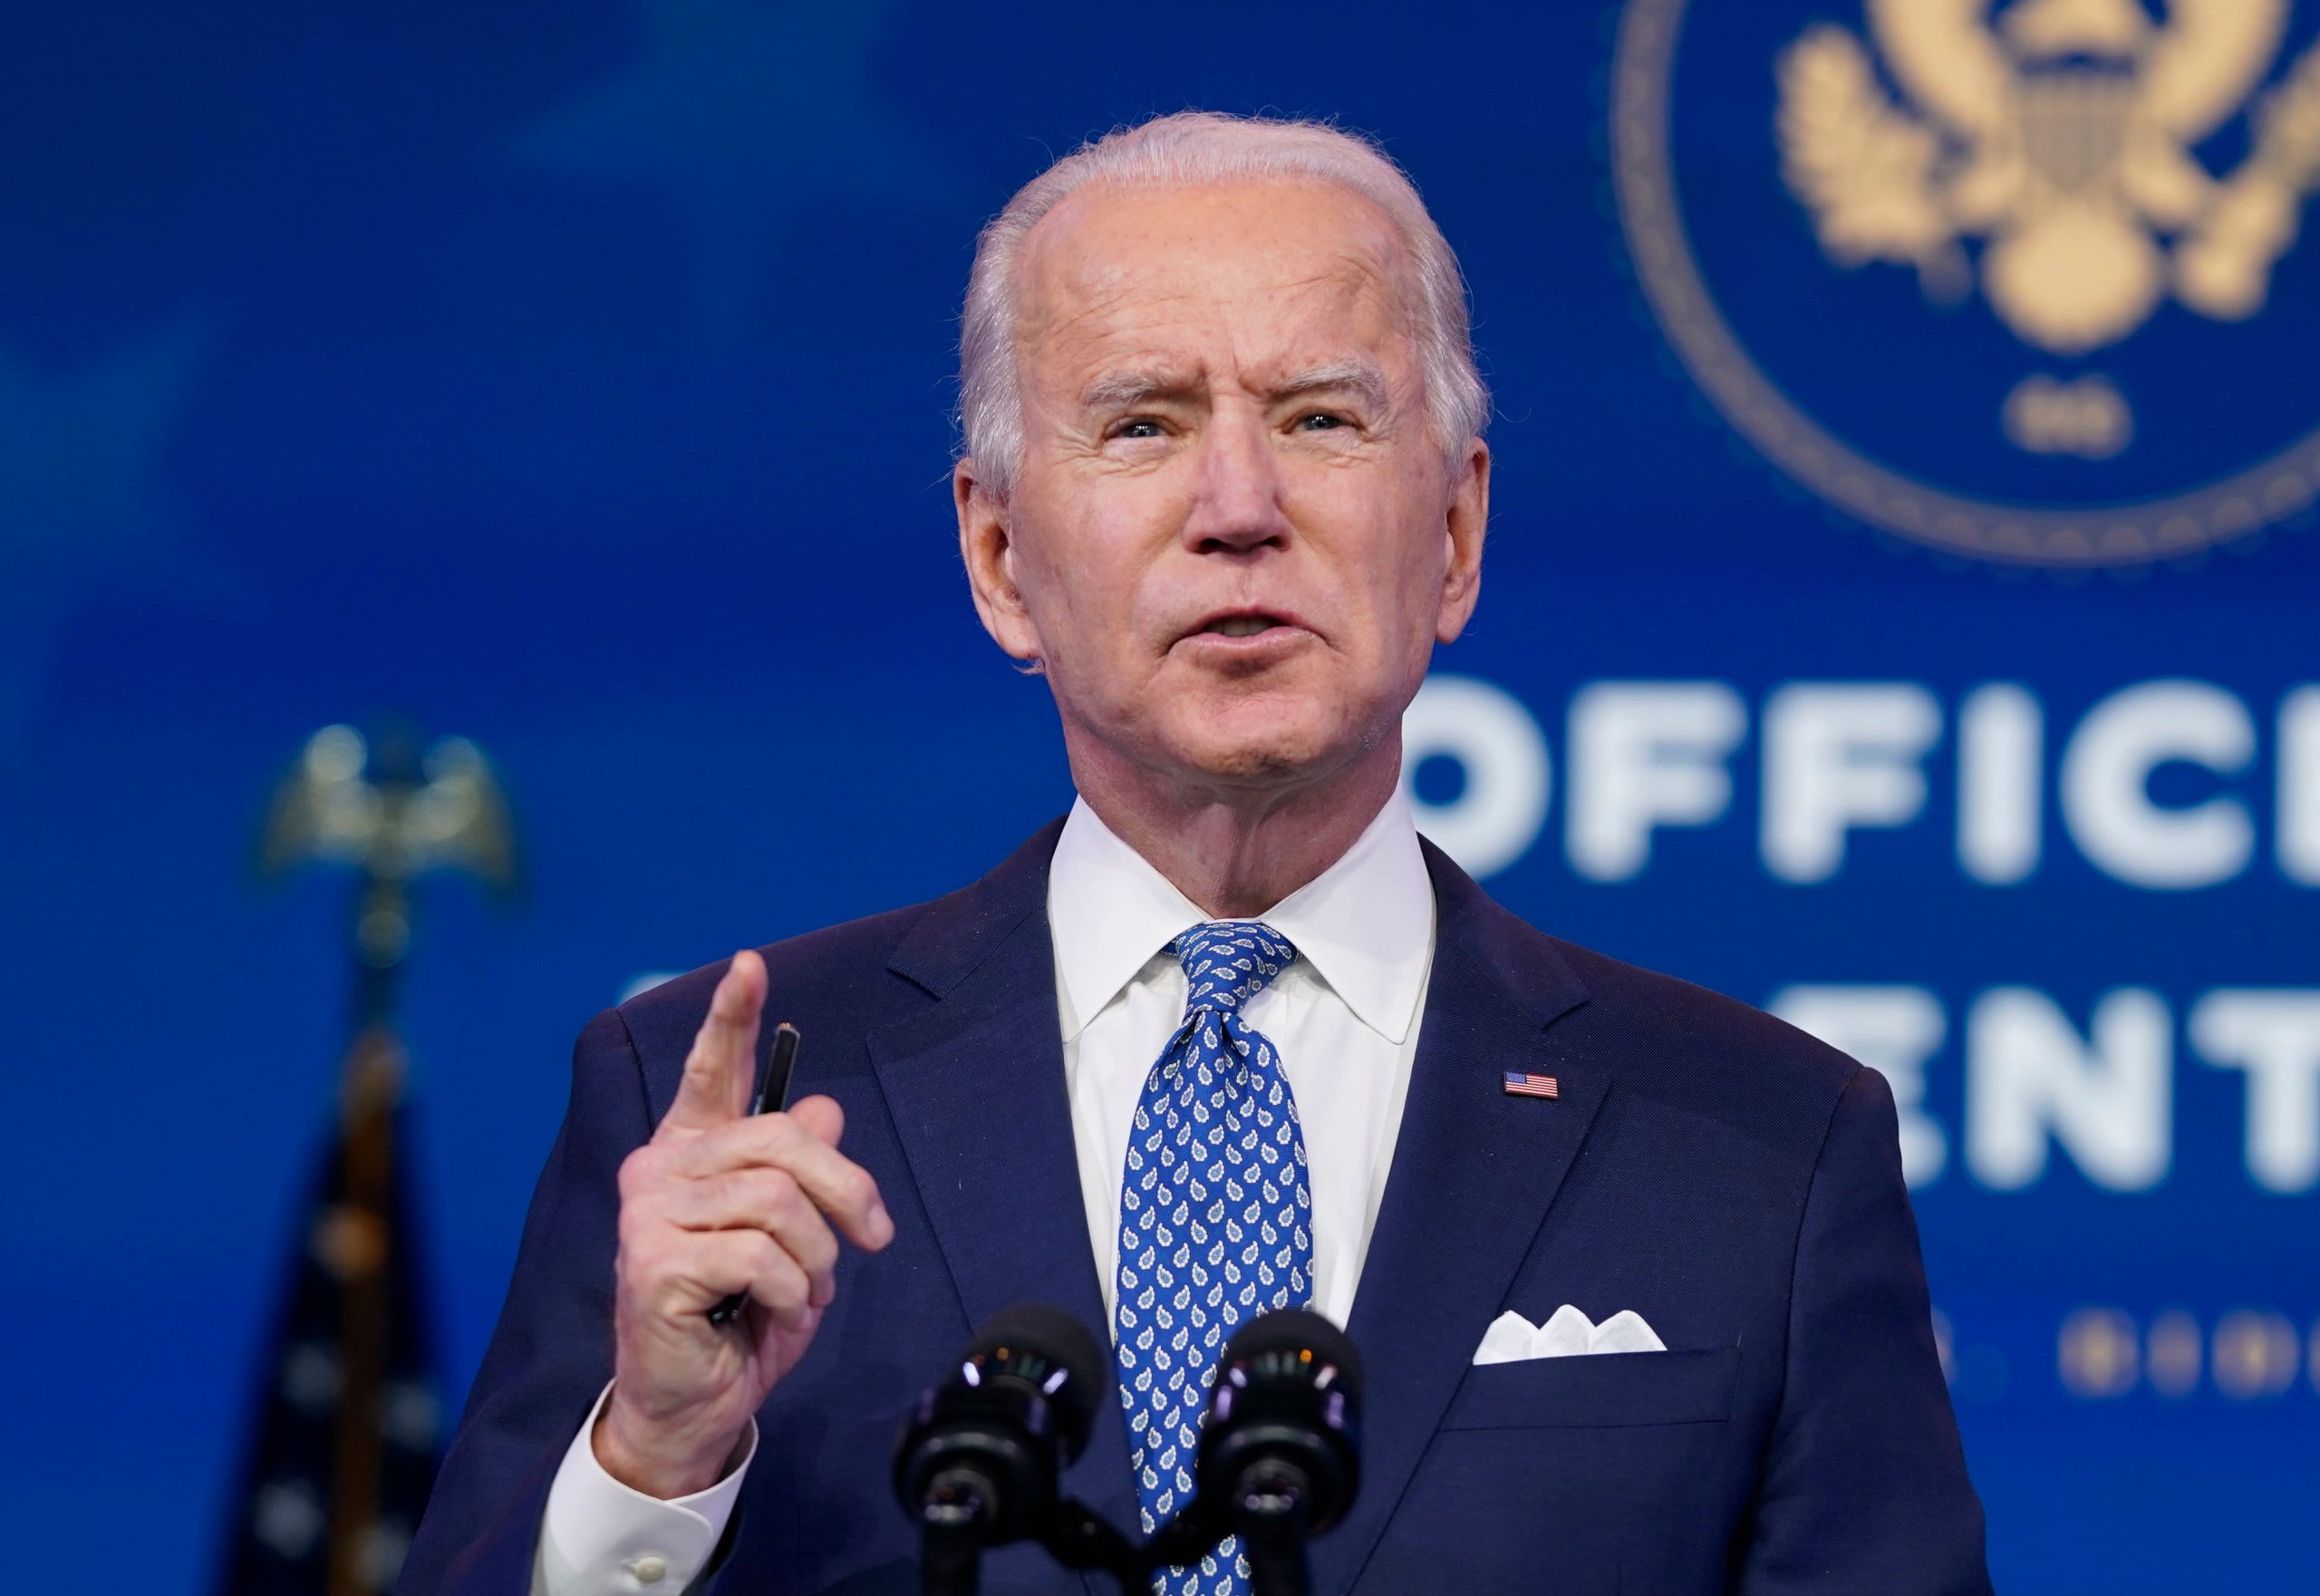 How involved traders must be about Biden’s tax proposals